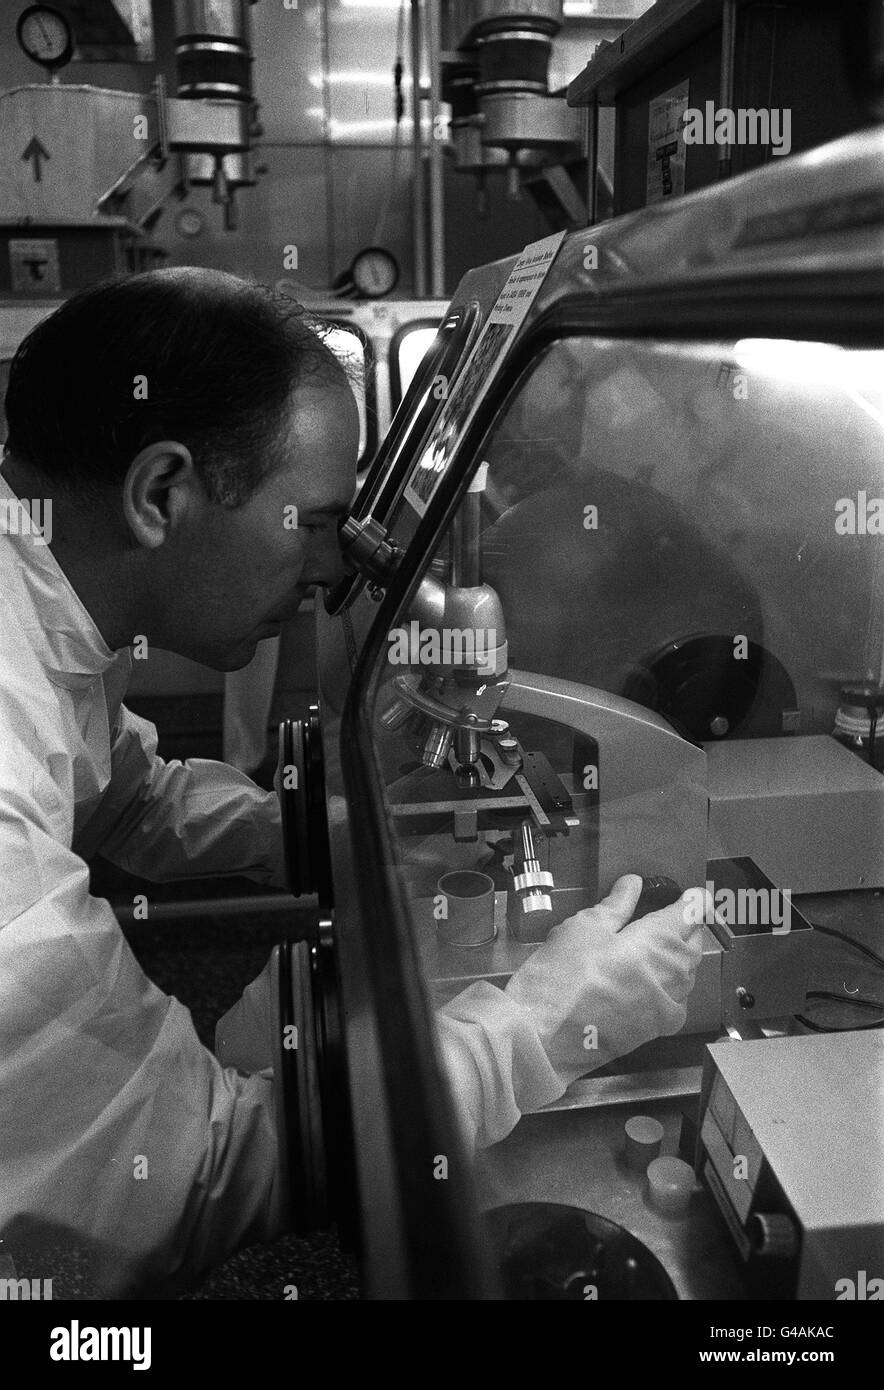 PA NEWS PHOTO 9/5/75 PORTON,WILTSHIRE A LABORATORY FOR THE STUDY OF INFECTIOUS DISEASES AT THE MICROBIOLOGICAL RESEARCH ESTABLISHMENT. MR. DON GRANT A HIGHER SCIENTIFIC OFFICER IS USING A MICROSCOPE INSIDE ONE OF THE GAS-TIGHT CABINETS DESIGNED TO GIVE ABSOLUTE BIOLOGICAL CONTAINMENT. Stock Photo